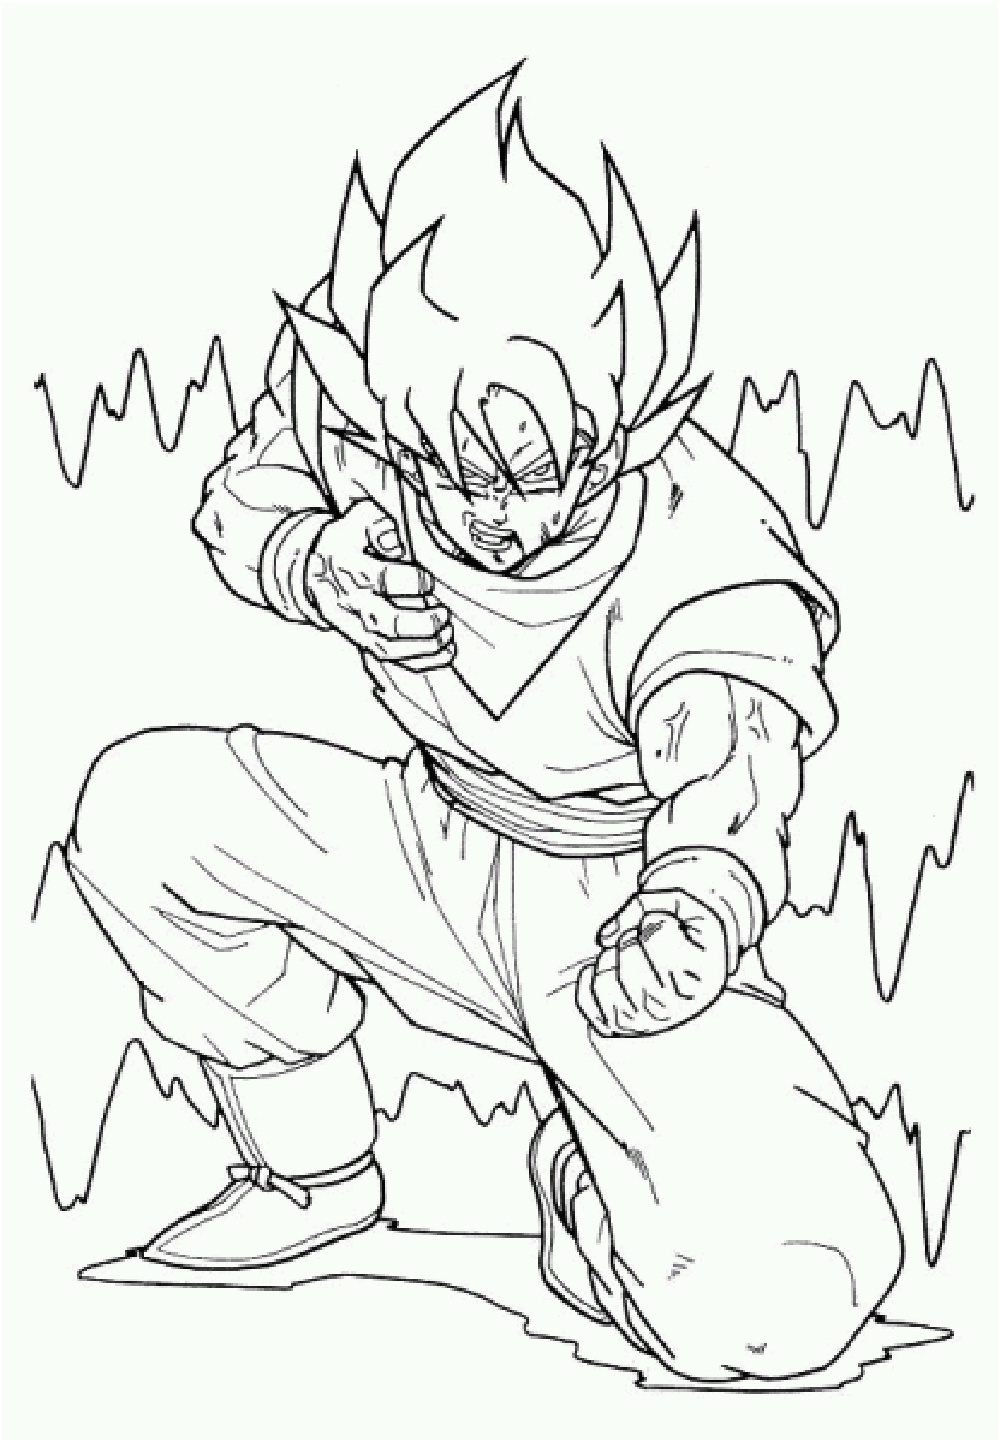 9 Divers Coloriage Dragon Ball Super Broly Images | COLORIAGE